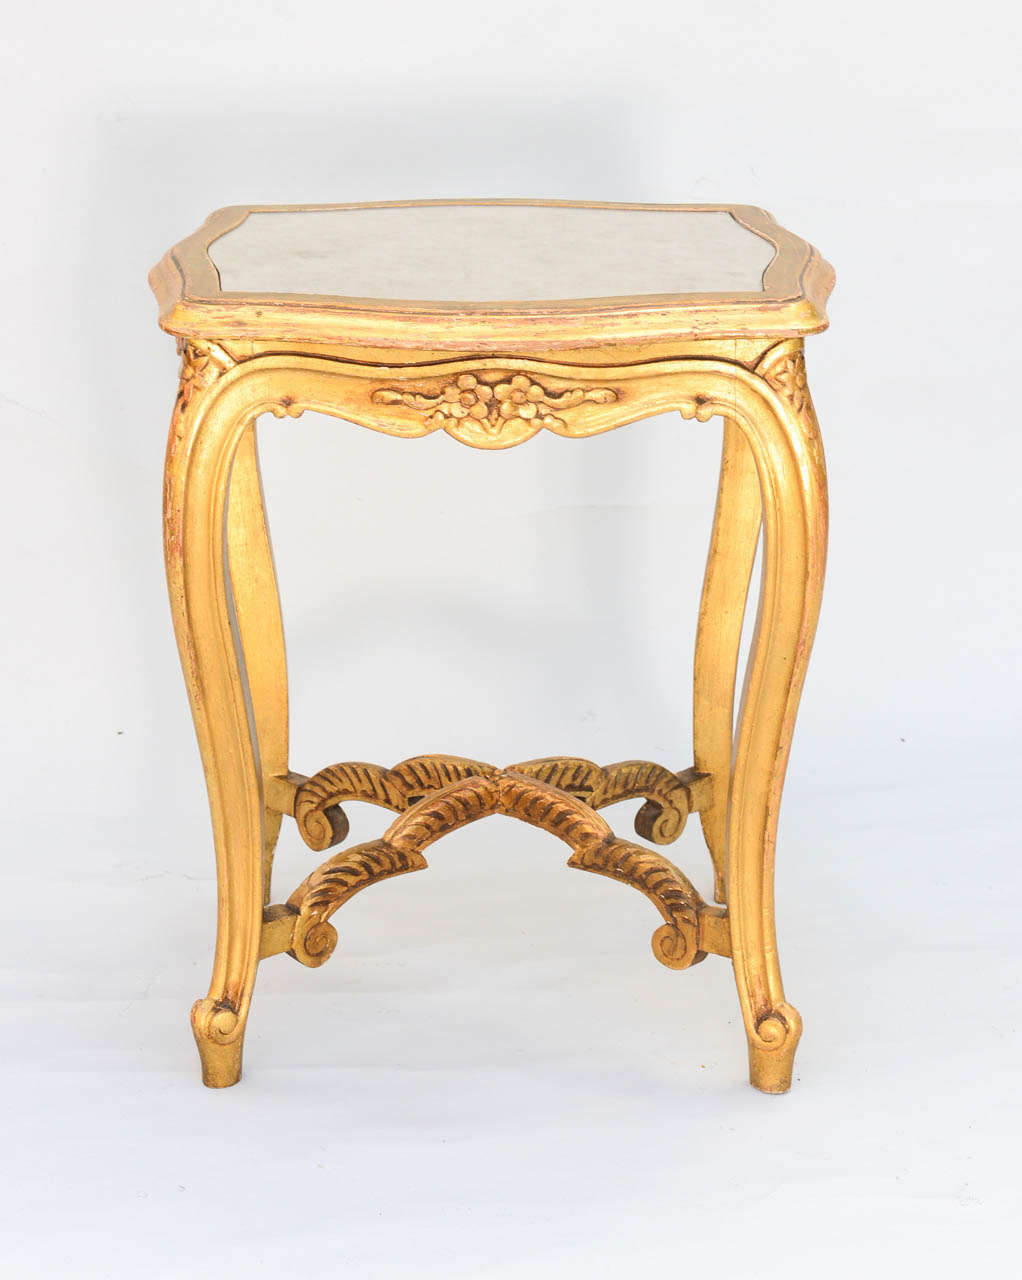 Carved giltwood accent table, having a distressed mirrored top inset in frame, apron with floral details, raised on cabriole legs connected by X-stretcher.